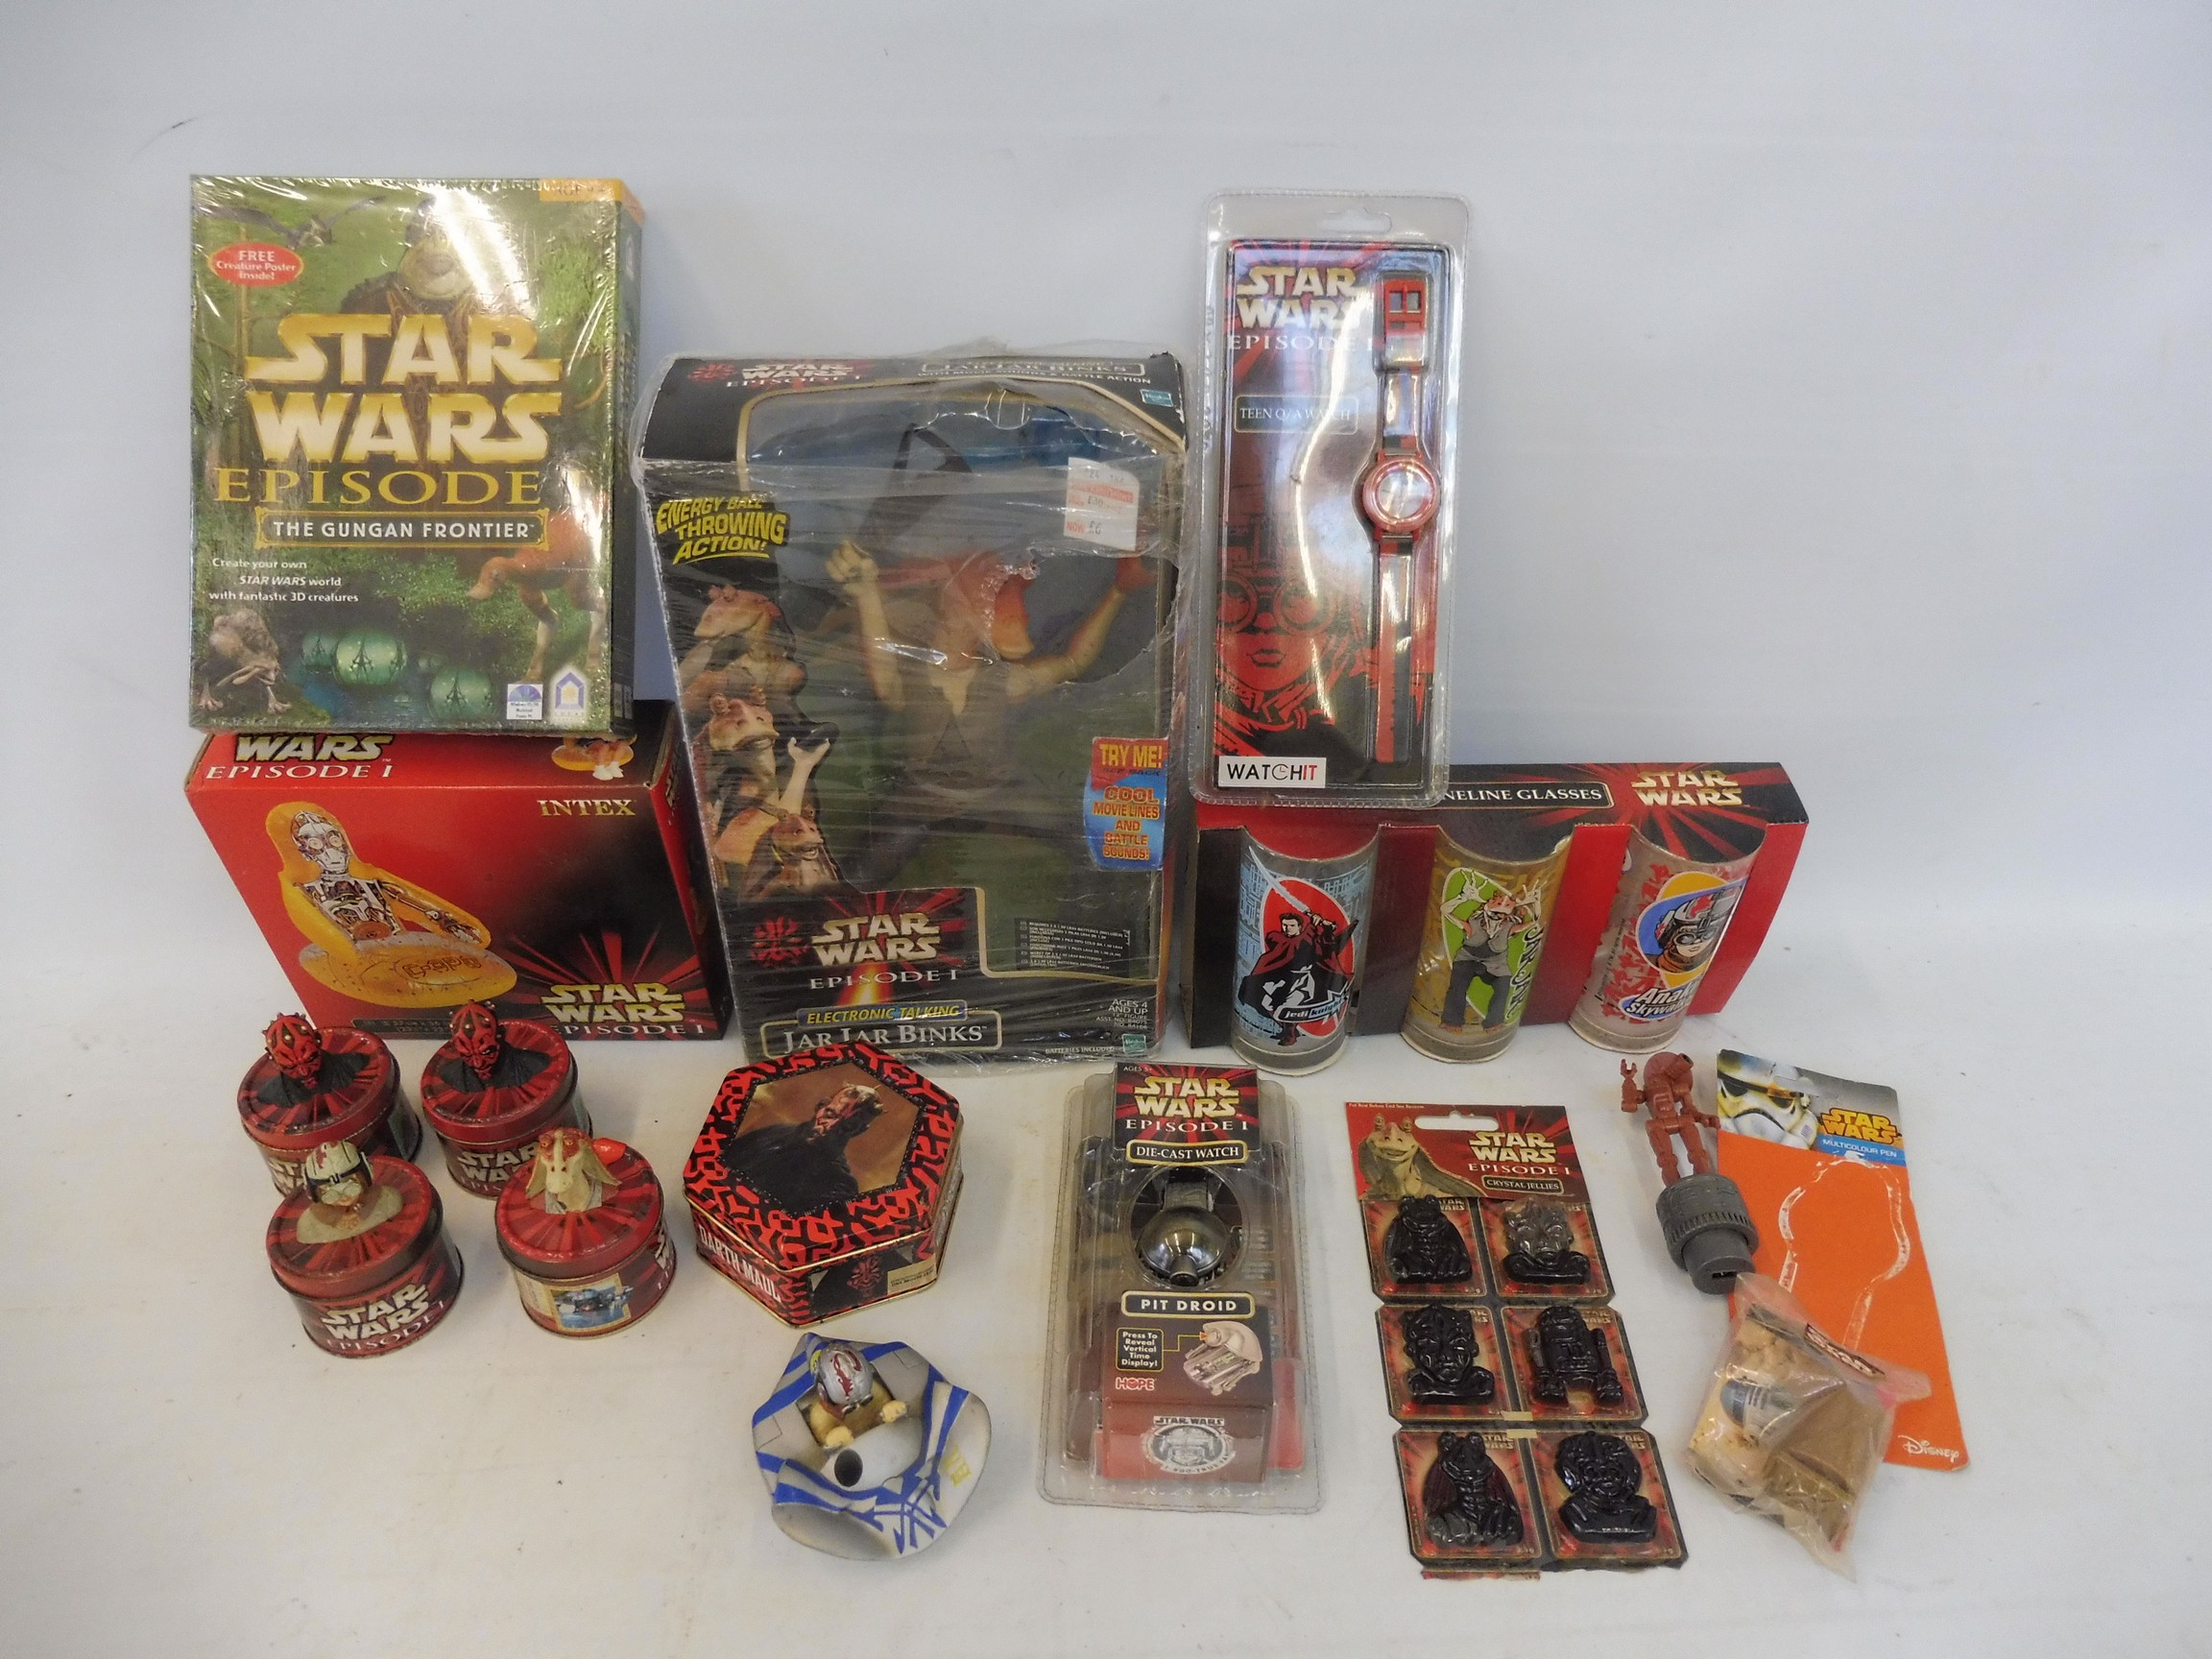 A box of mainly Episode One figures and collectables.